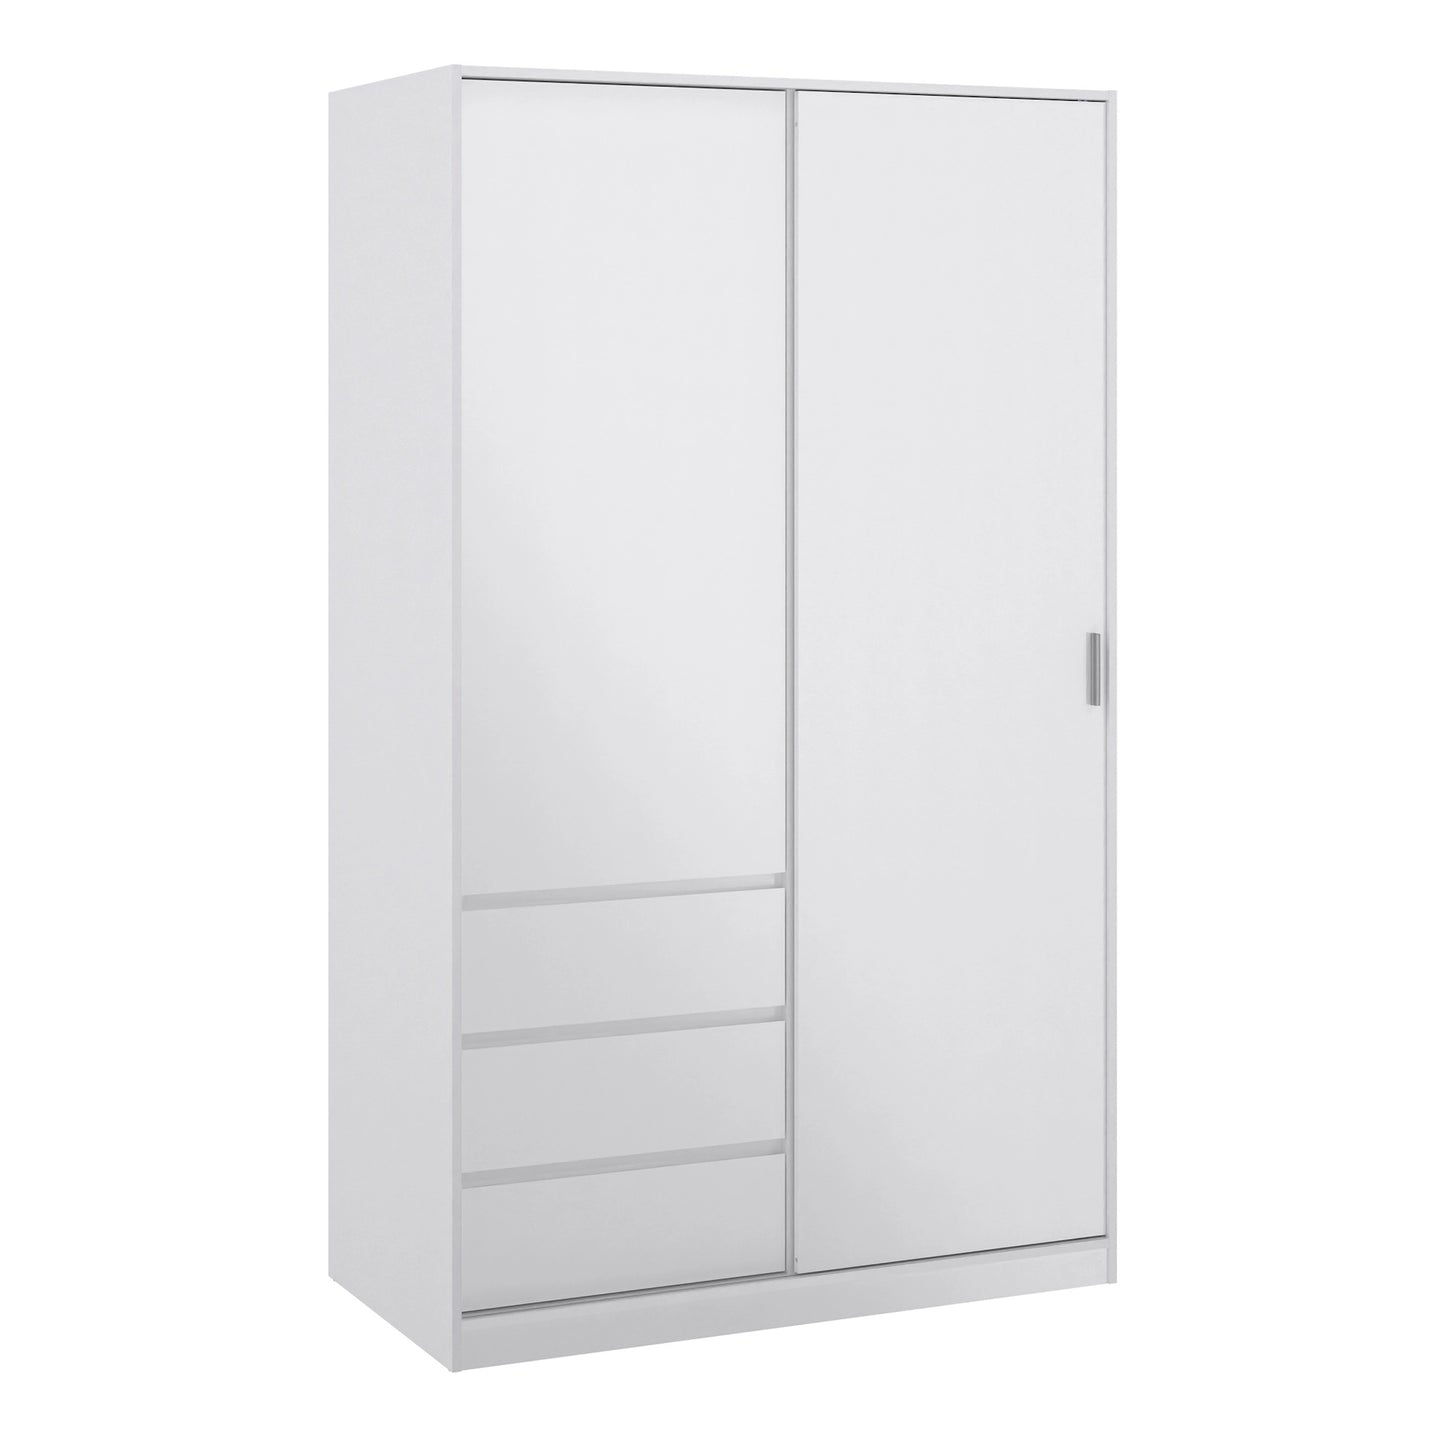 Furniture To Go Naia Wardrobe with 1 Sliding Door + 1 Door + 3 Drawers in White High Gloss